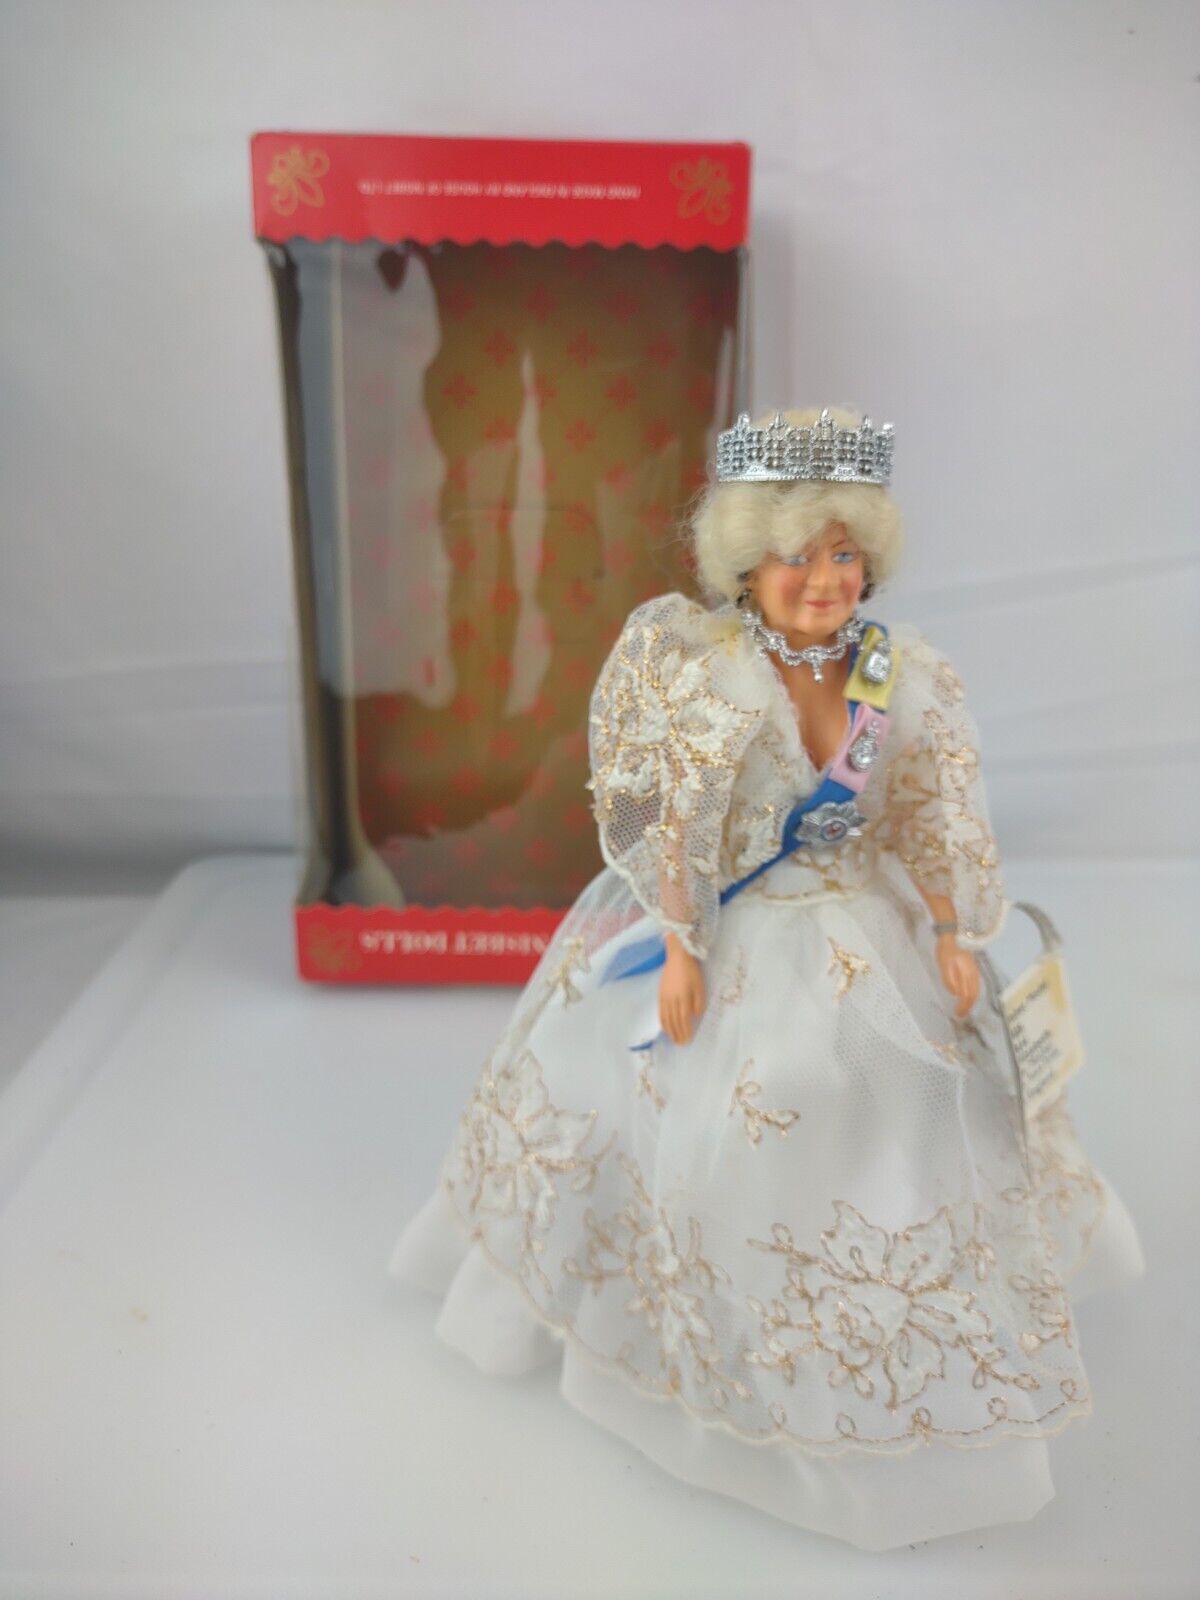 Rare Peggy Nisbet Queen Elizabeth The Queen Mother 80th Birthday States Dress